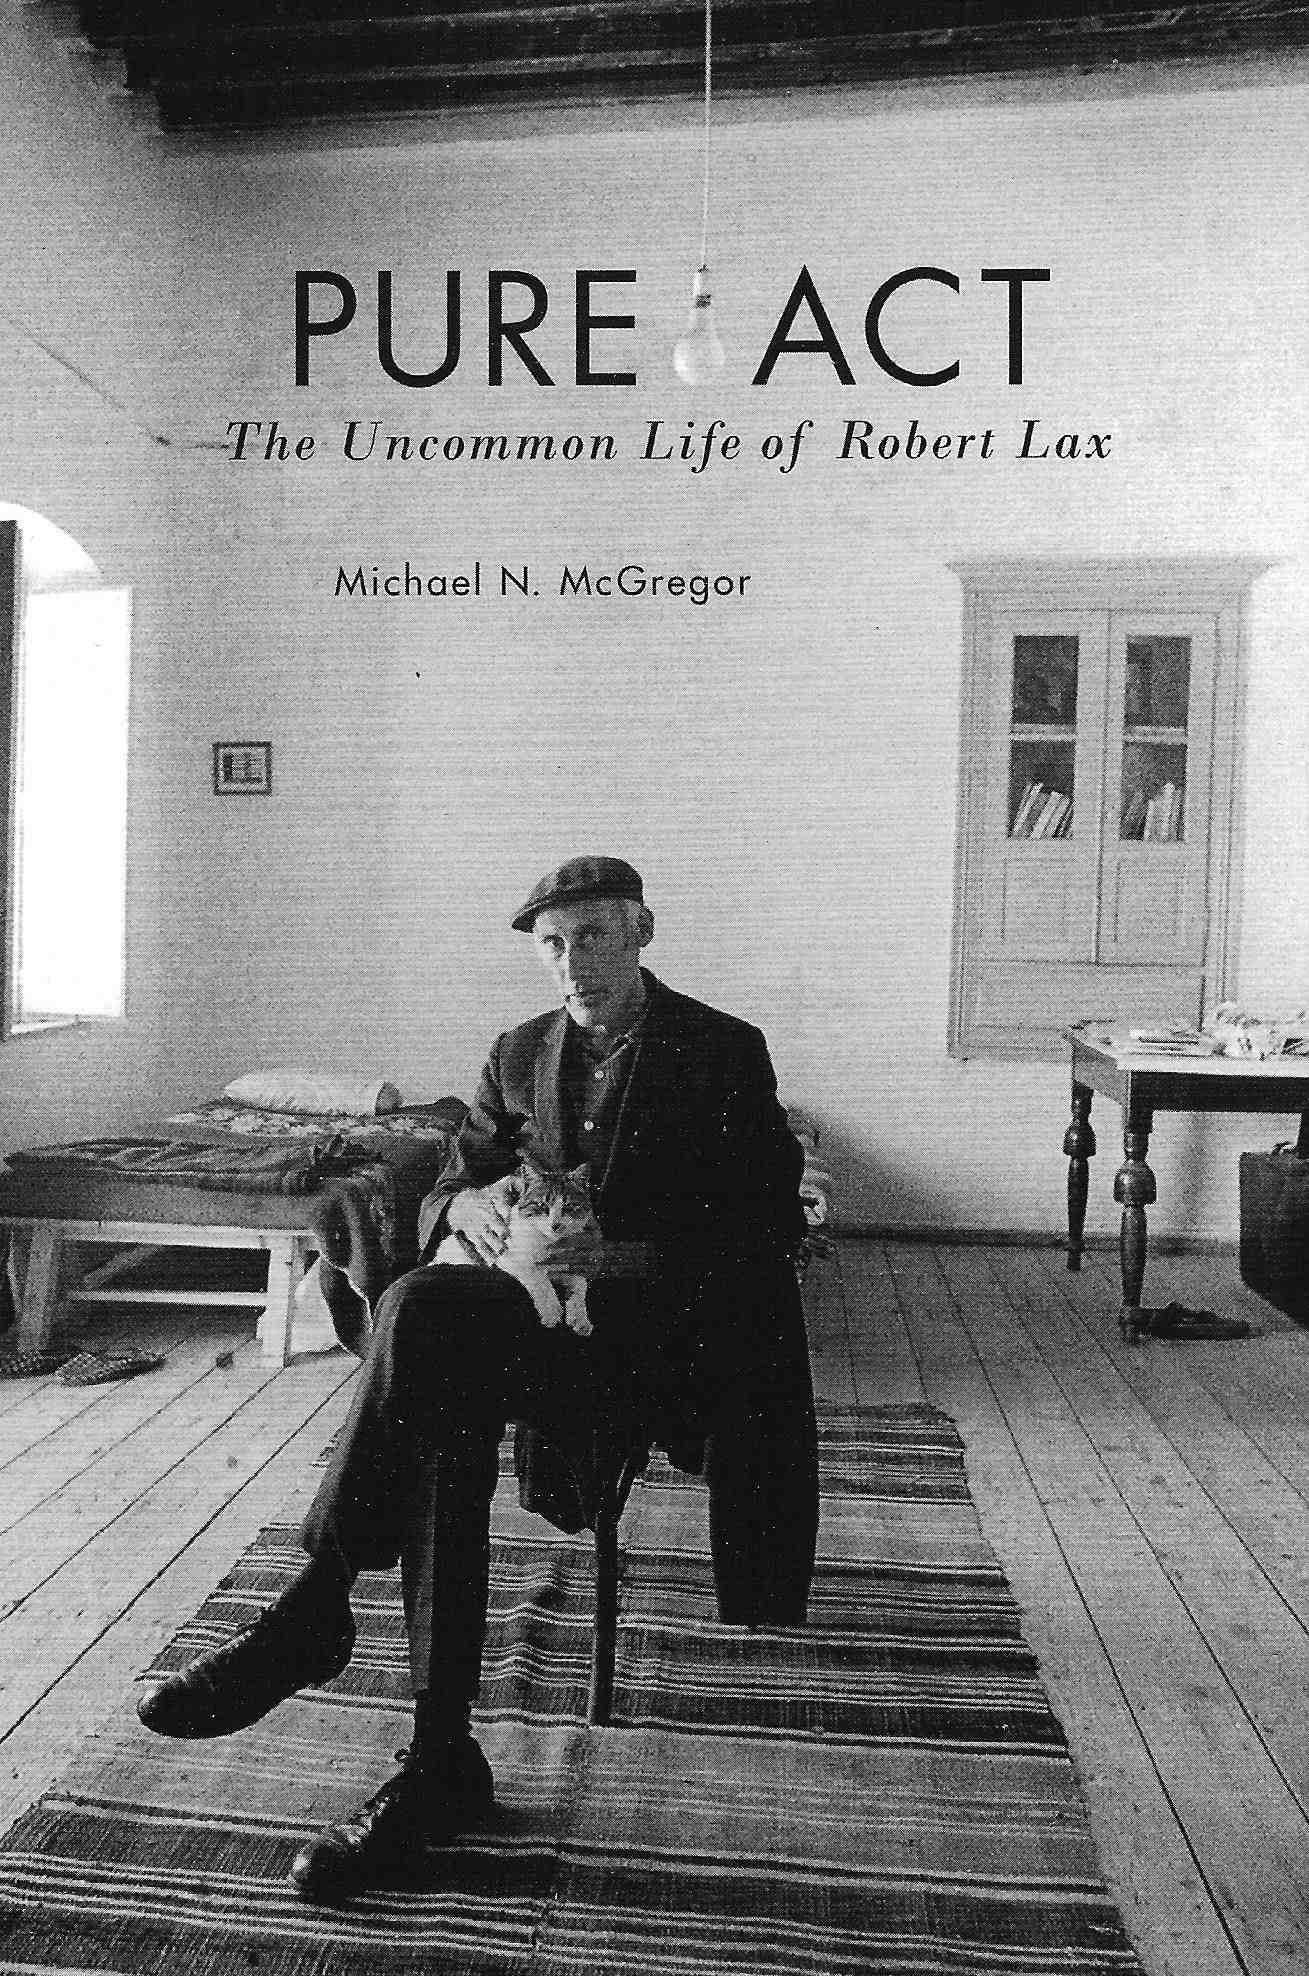 The cover of Pure Act: The Uncommon Life of Robert Lax